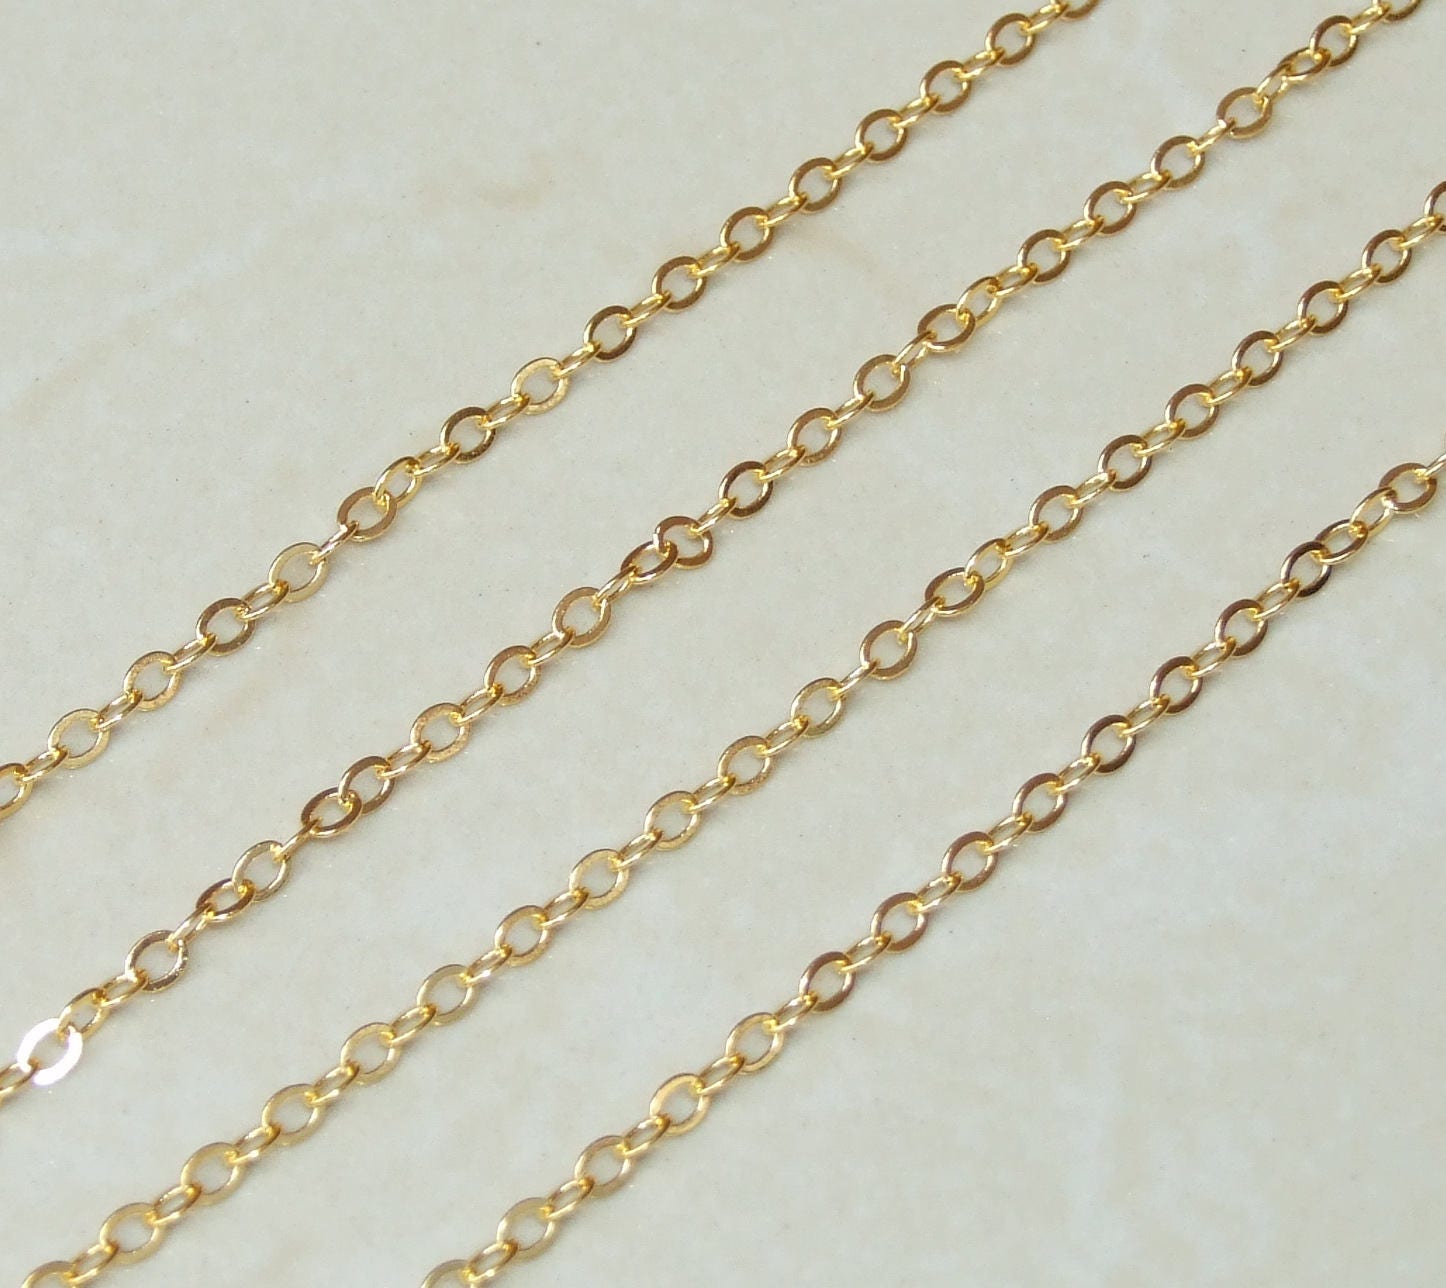 Oval Link Cable Chain, Flat Cable Chain, Jewelry Chain, Necklace Chain, Gold Plated Chain, Body Chain, Bulk Chain, 2.2mm x 3mm, SZ-G